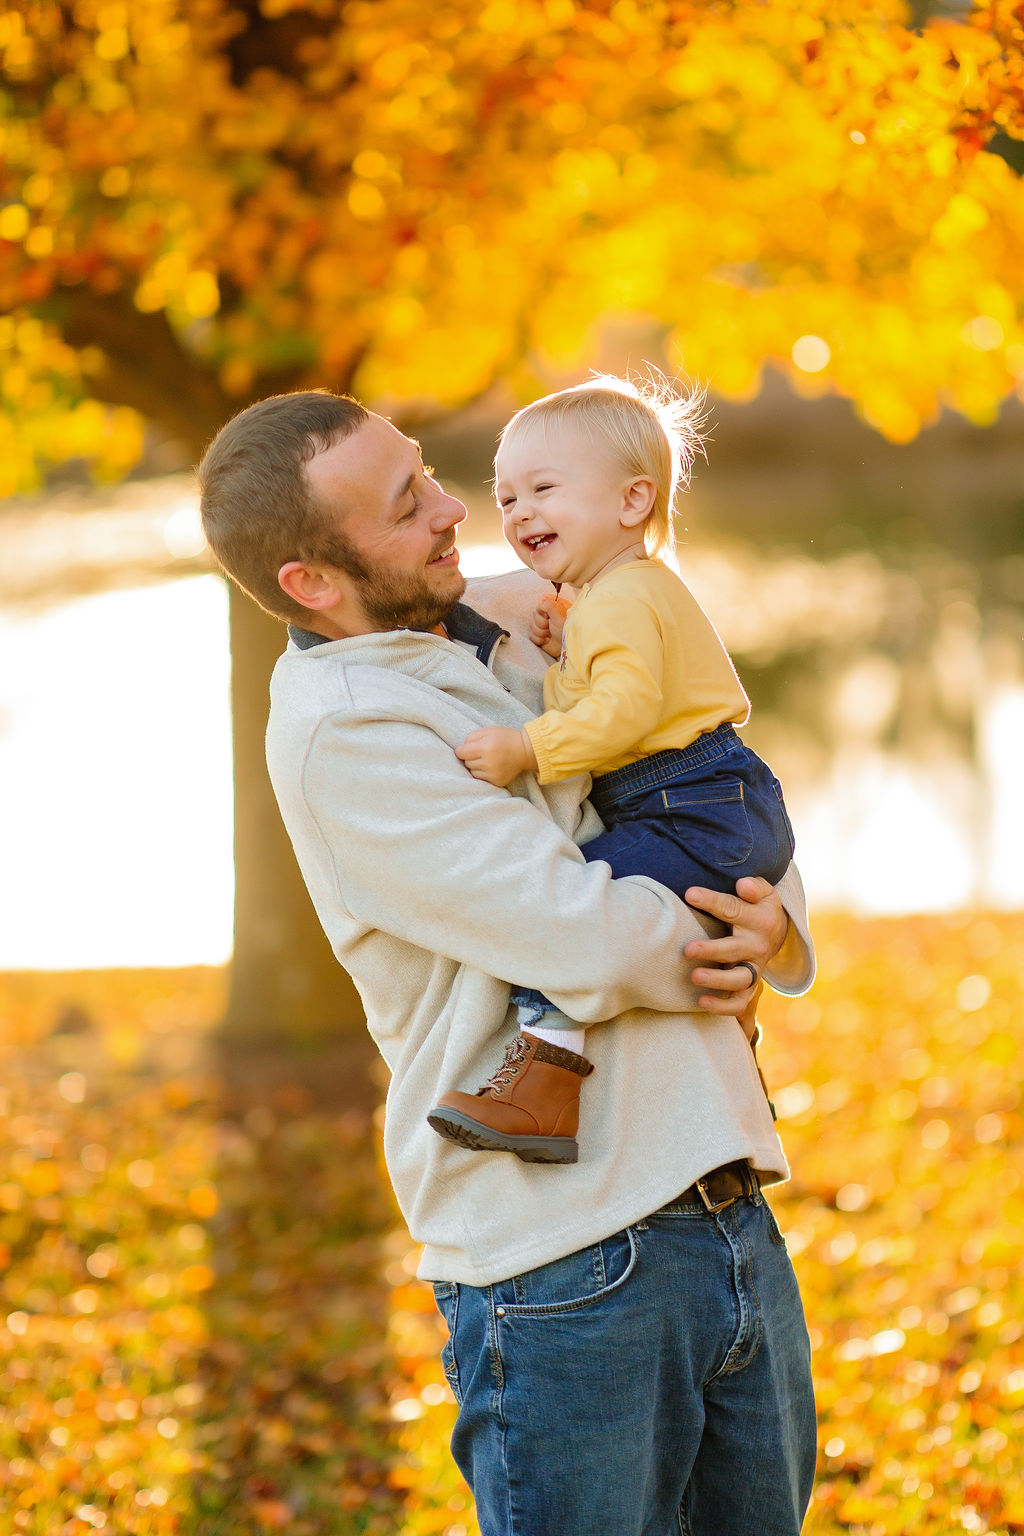 A father laughs and plays with his toddler daughter in a yellow shirt in a park in fall